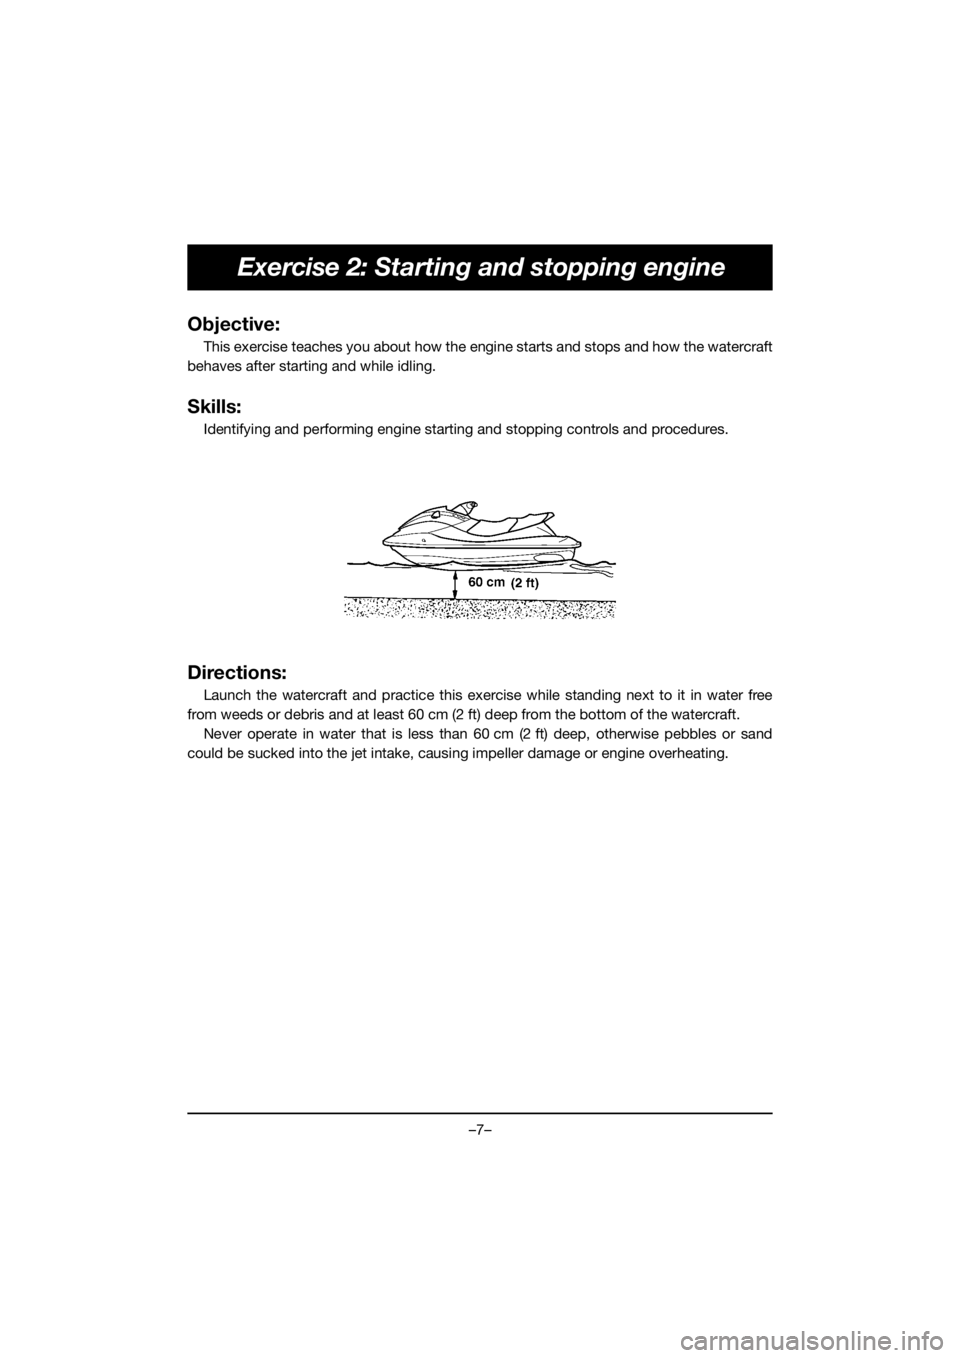 YAMAHA EX SPORT 2020  Notices Demploi (in French) –7–
Exercise 2: Starting and stopping engine
Objective:
This exercise teaches you about how the engine starts and stops and how the watercraft
behaves after starting and while idling.
Skills:
Iden